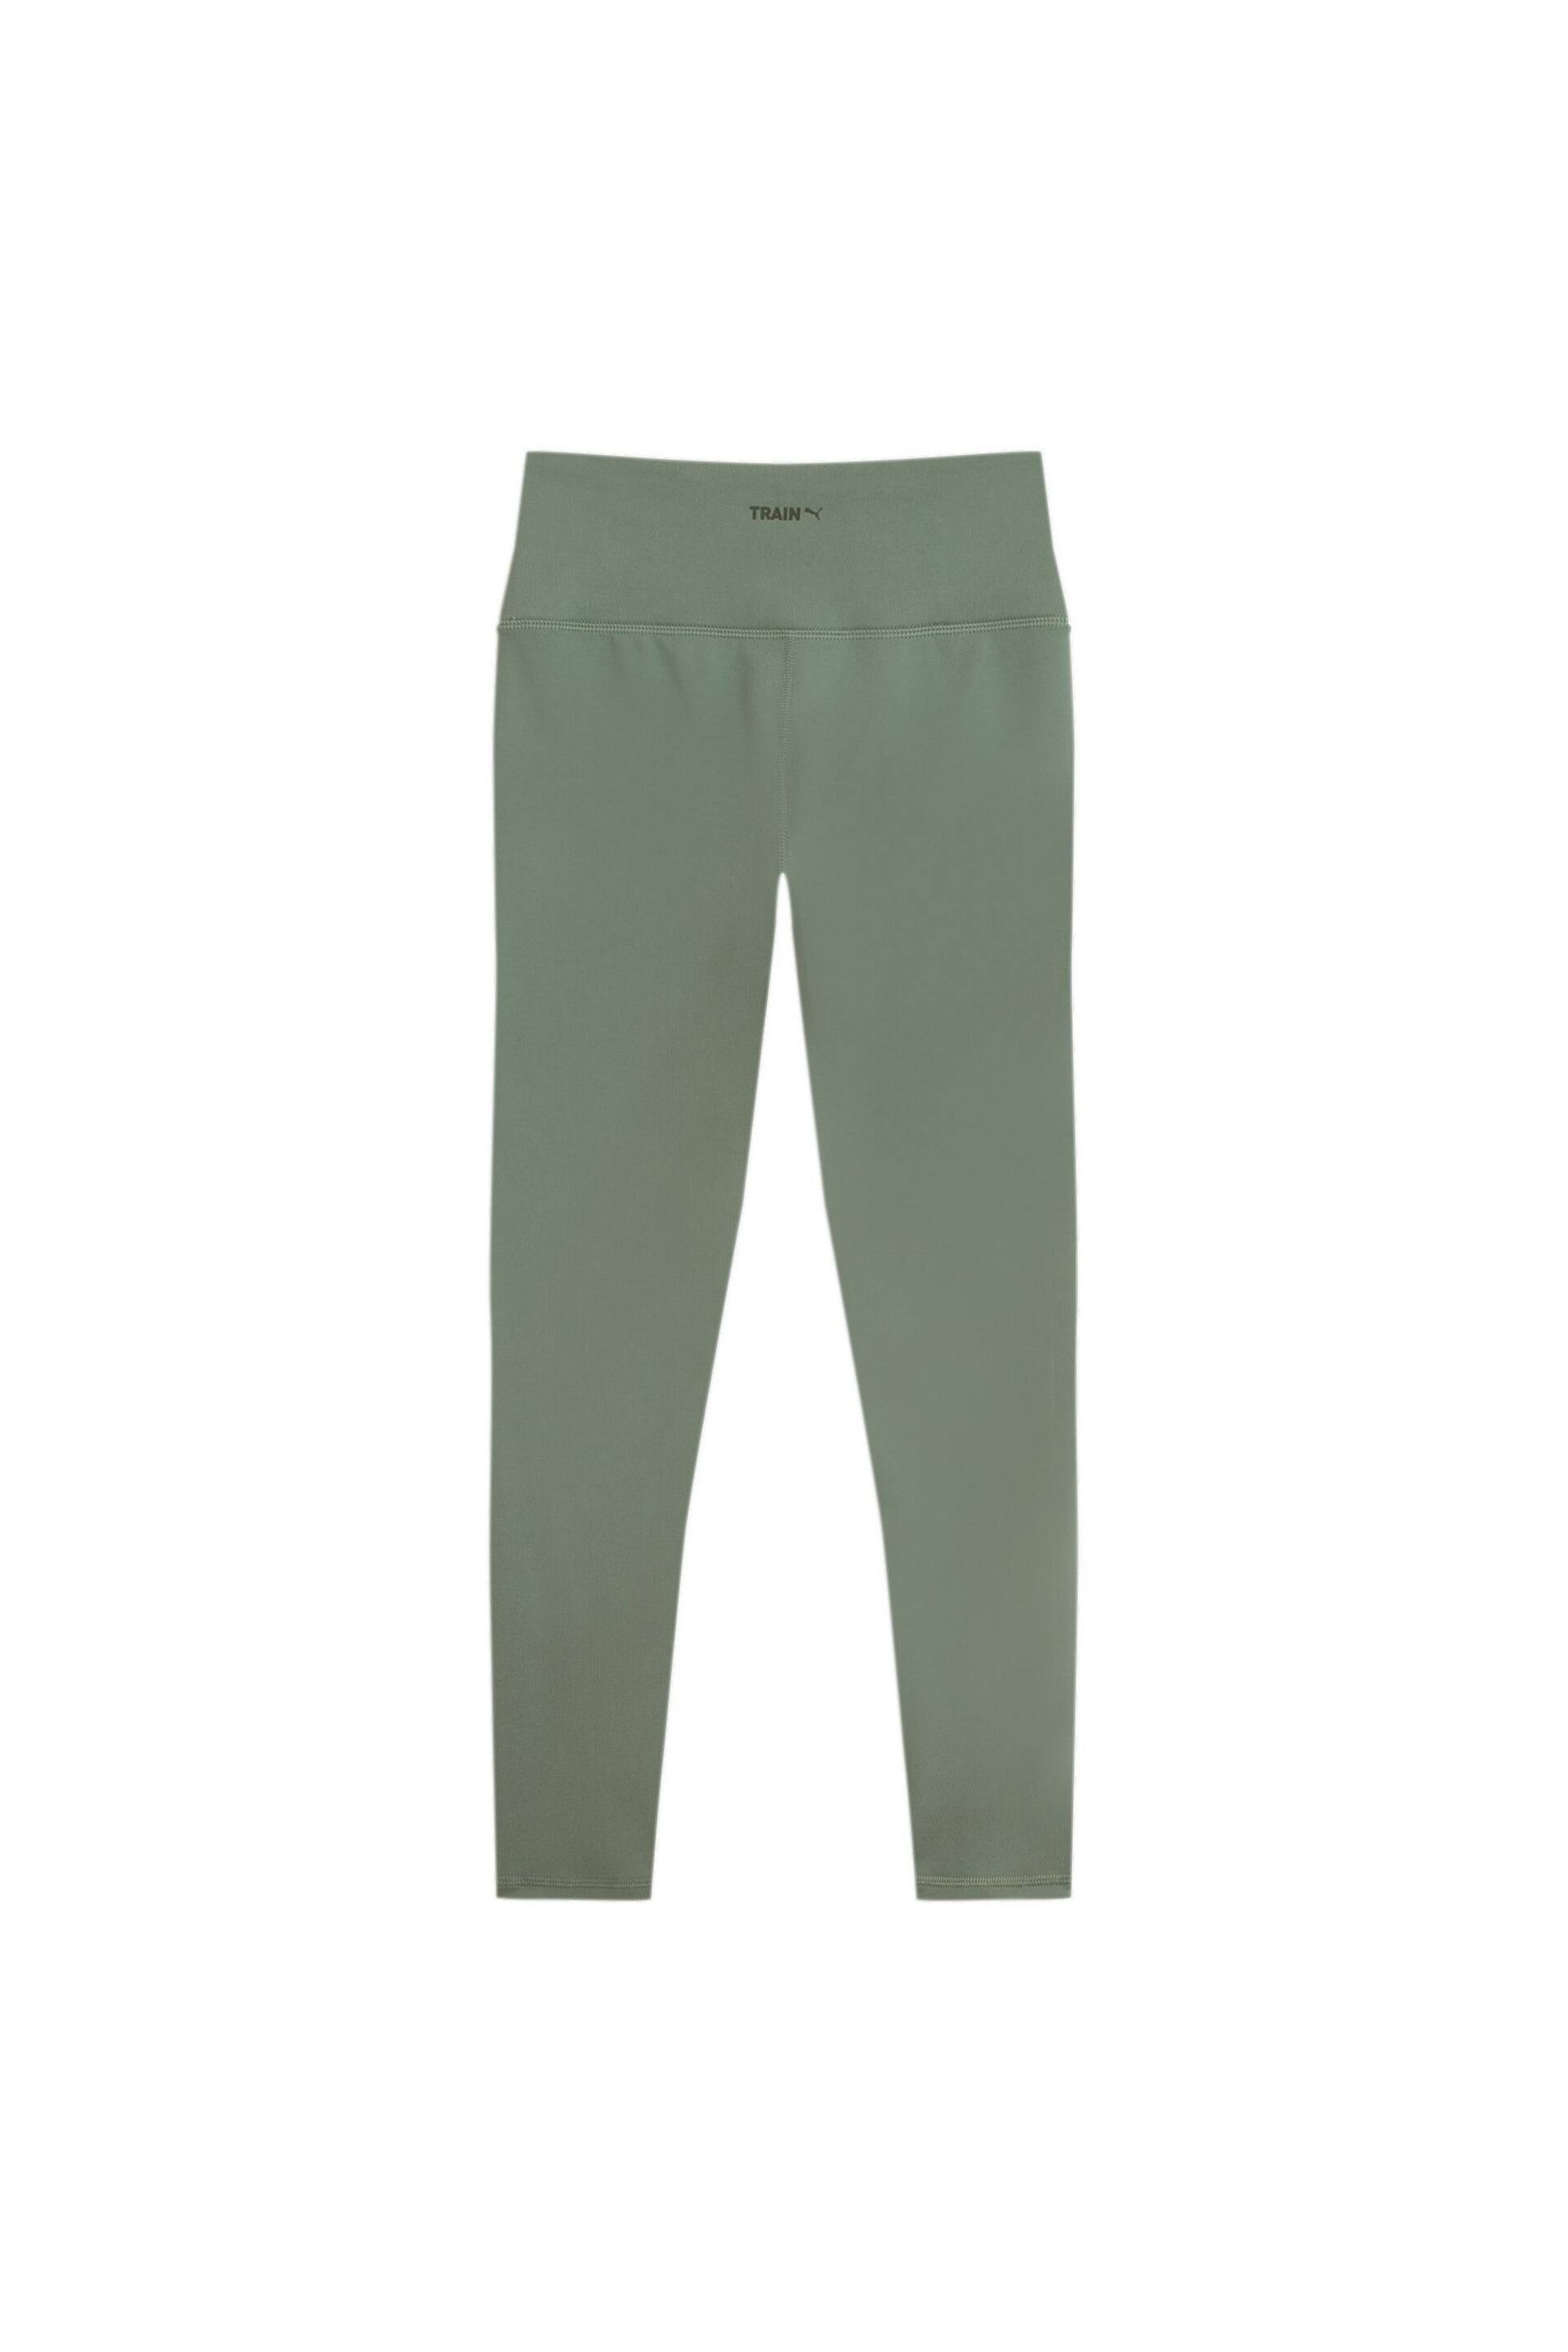 Puma Green EVOLVE Womens High-Waisted Full-Length Training Tights - Image 2 of 2